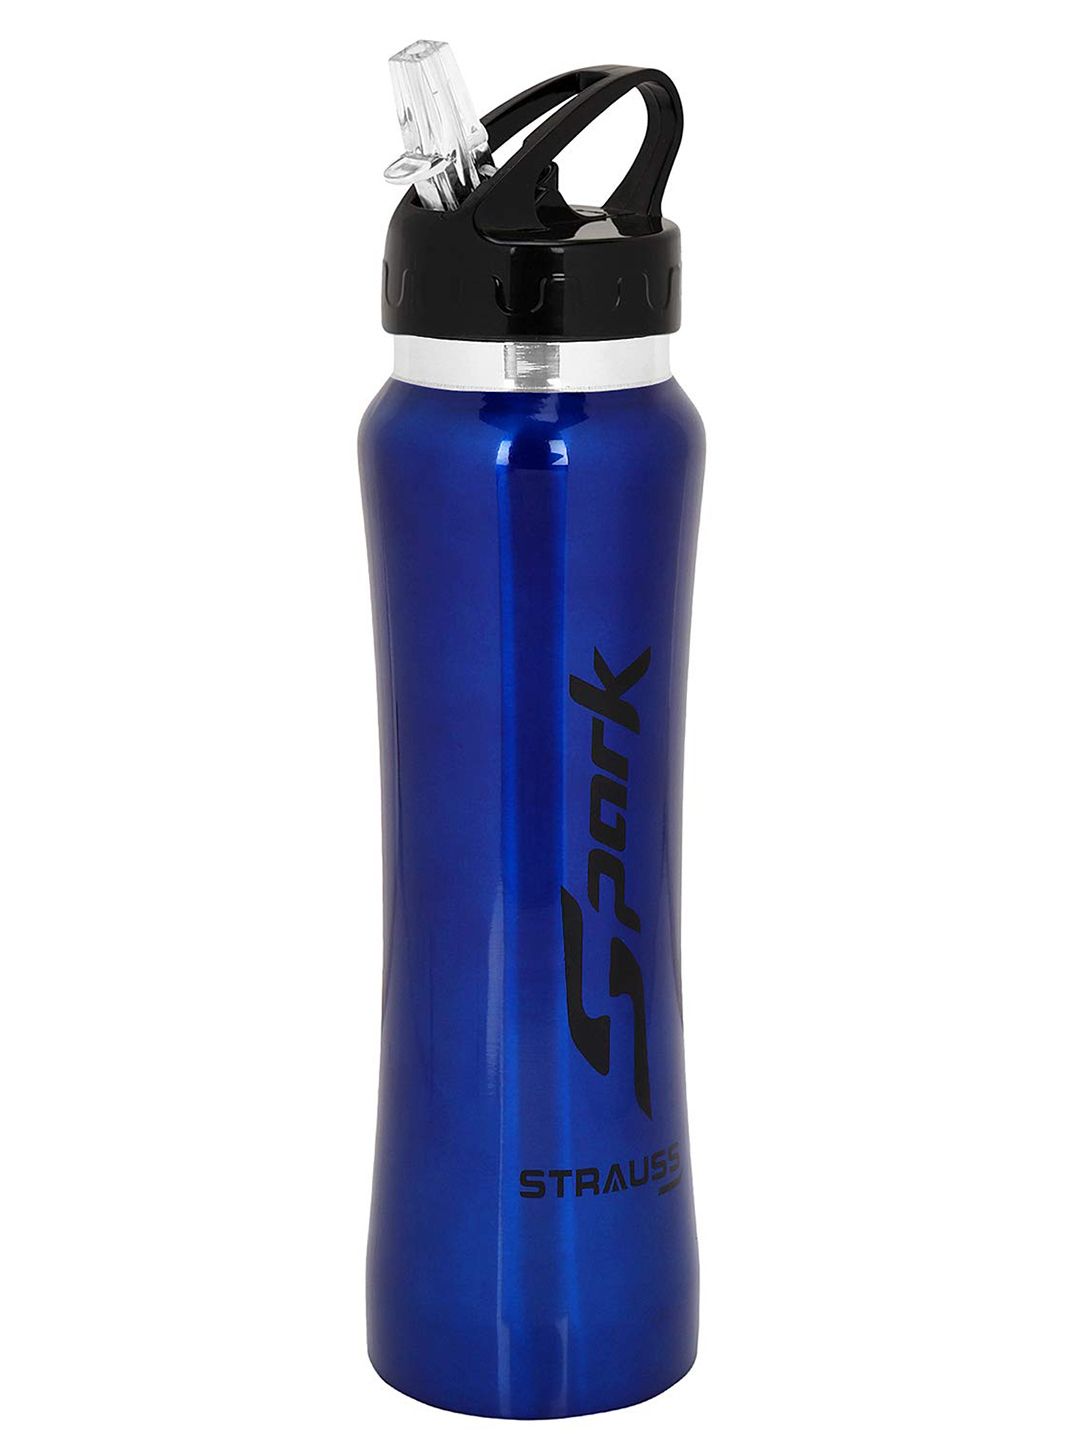 STRAUSS Blue & Black Solid Stainless-Steel Metal Finish Water Bottle - 750 ml Price in India